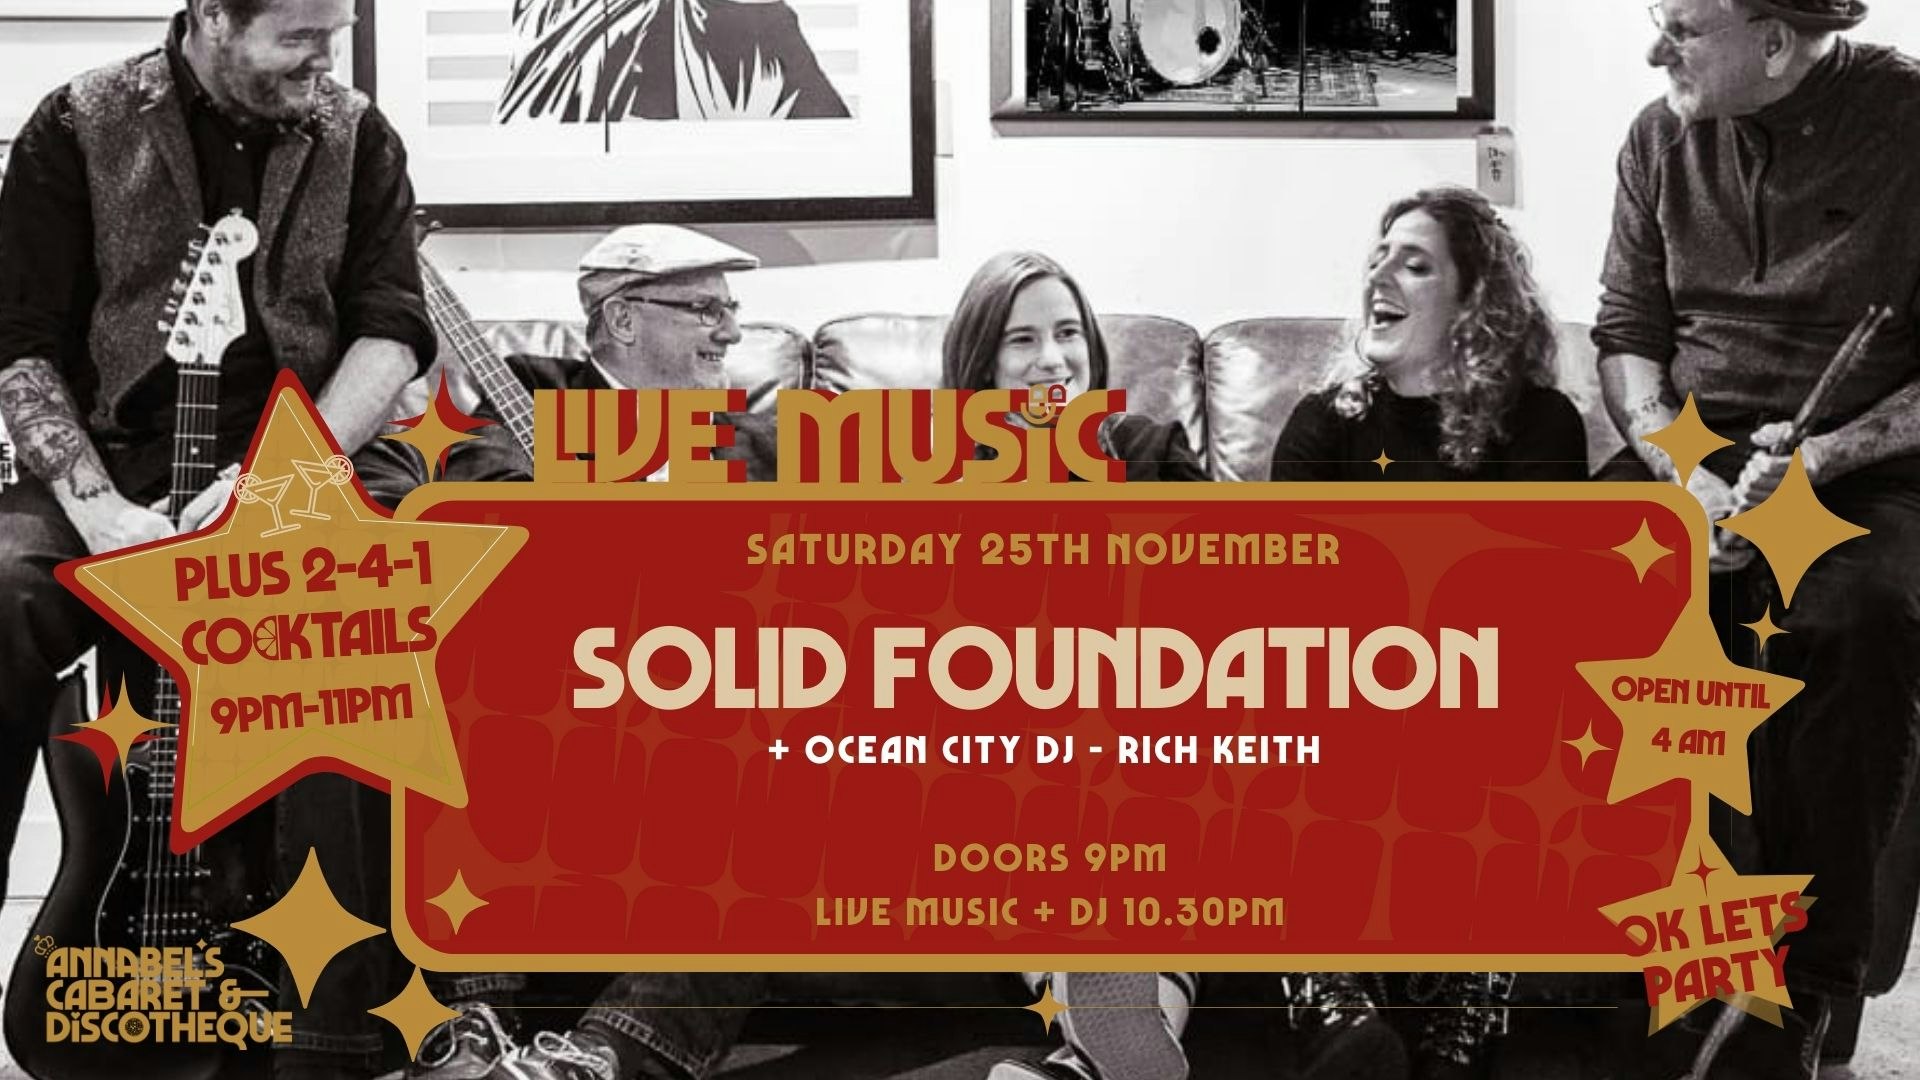 Live Music: SOLID FOUNDATION // Annabel’s Cabaret & Discotheque